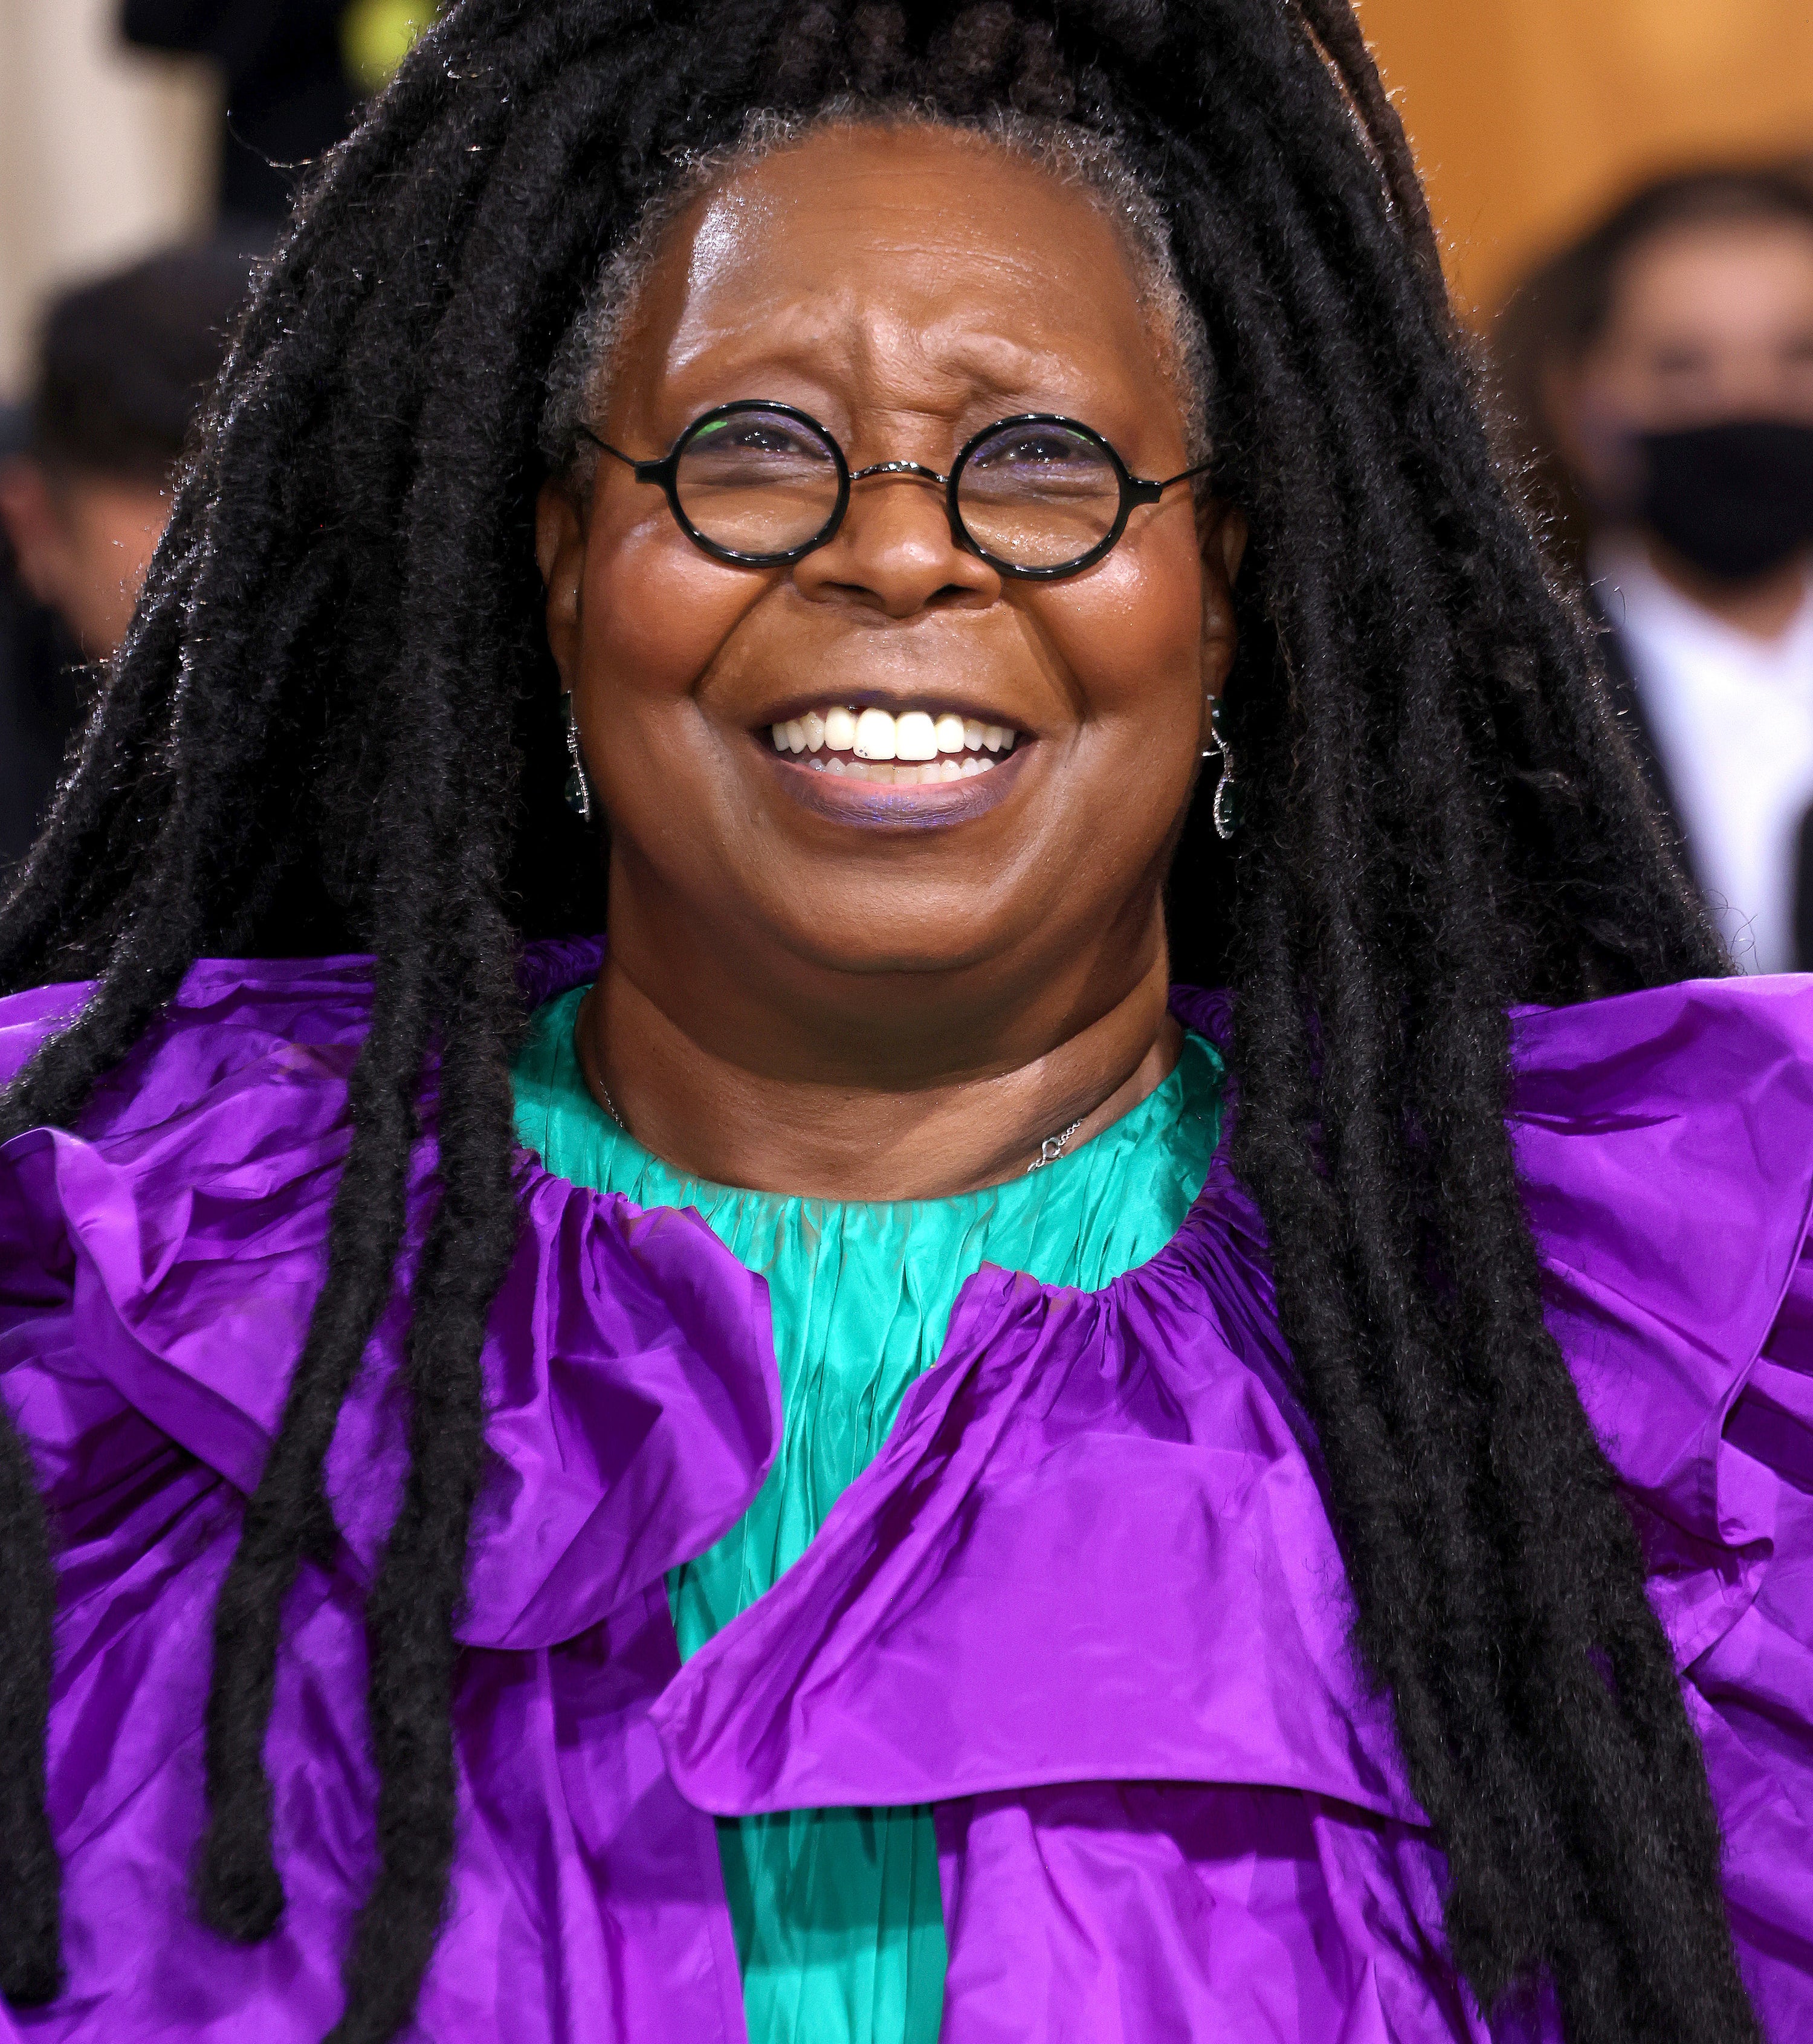 Whoopi Goldberg attends The 2021 Met Gala Celebrating In America: A Lexicon Of Fashion at Metropolitan Museum of Art on September 13, 2021